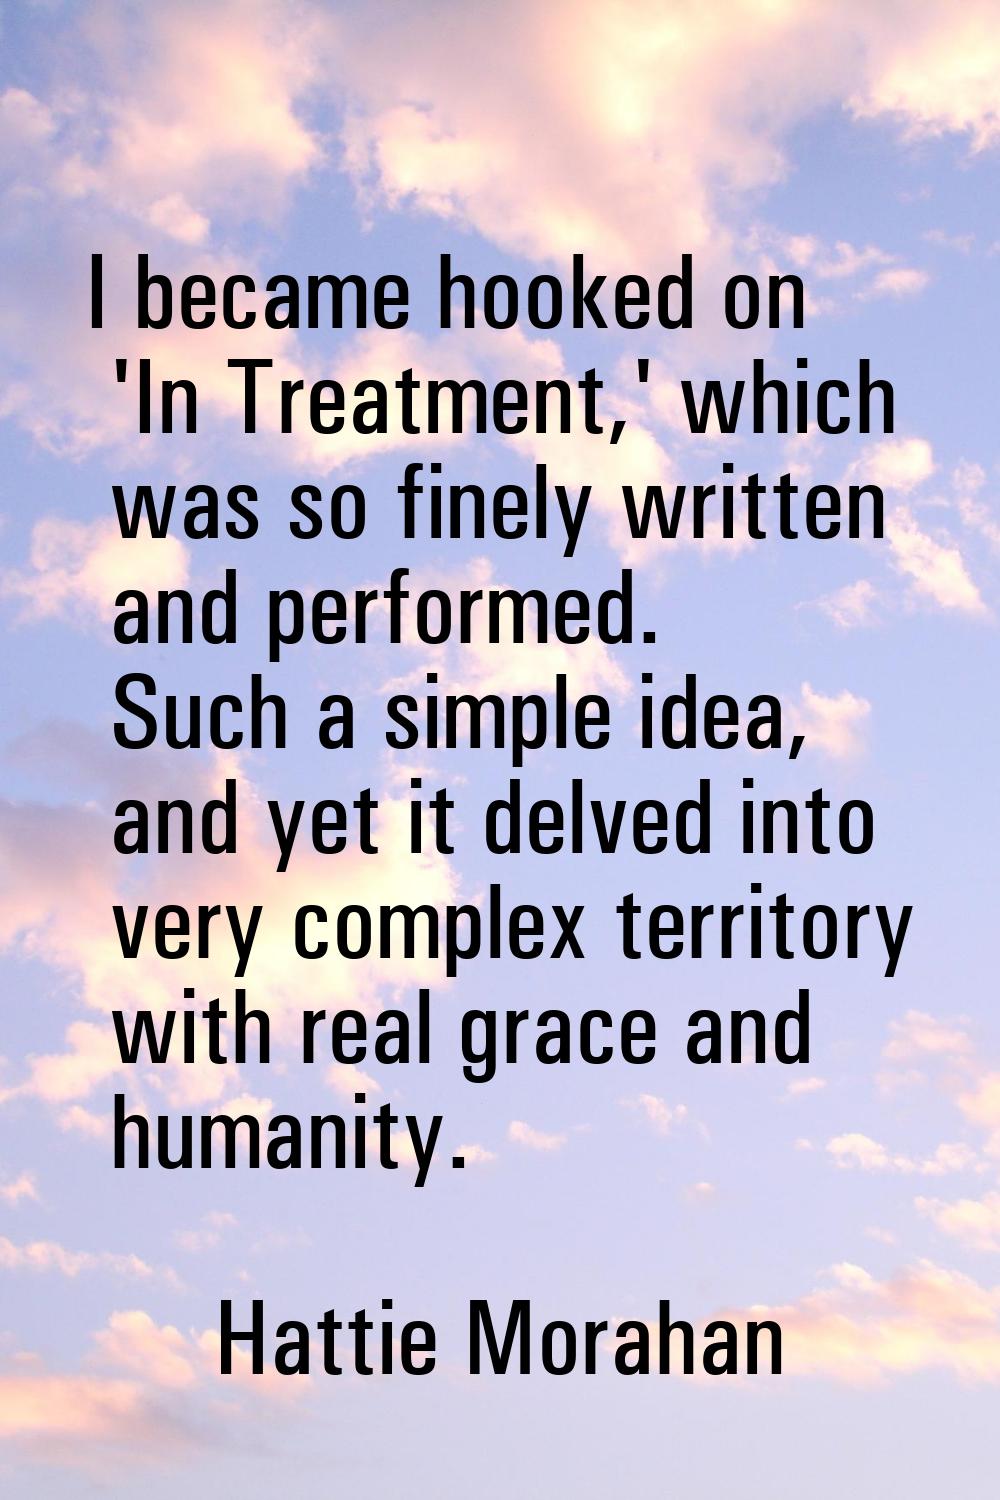 I became hooked on 'In Treatment,' which was so finely written and performed. Such a simple idea, a